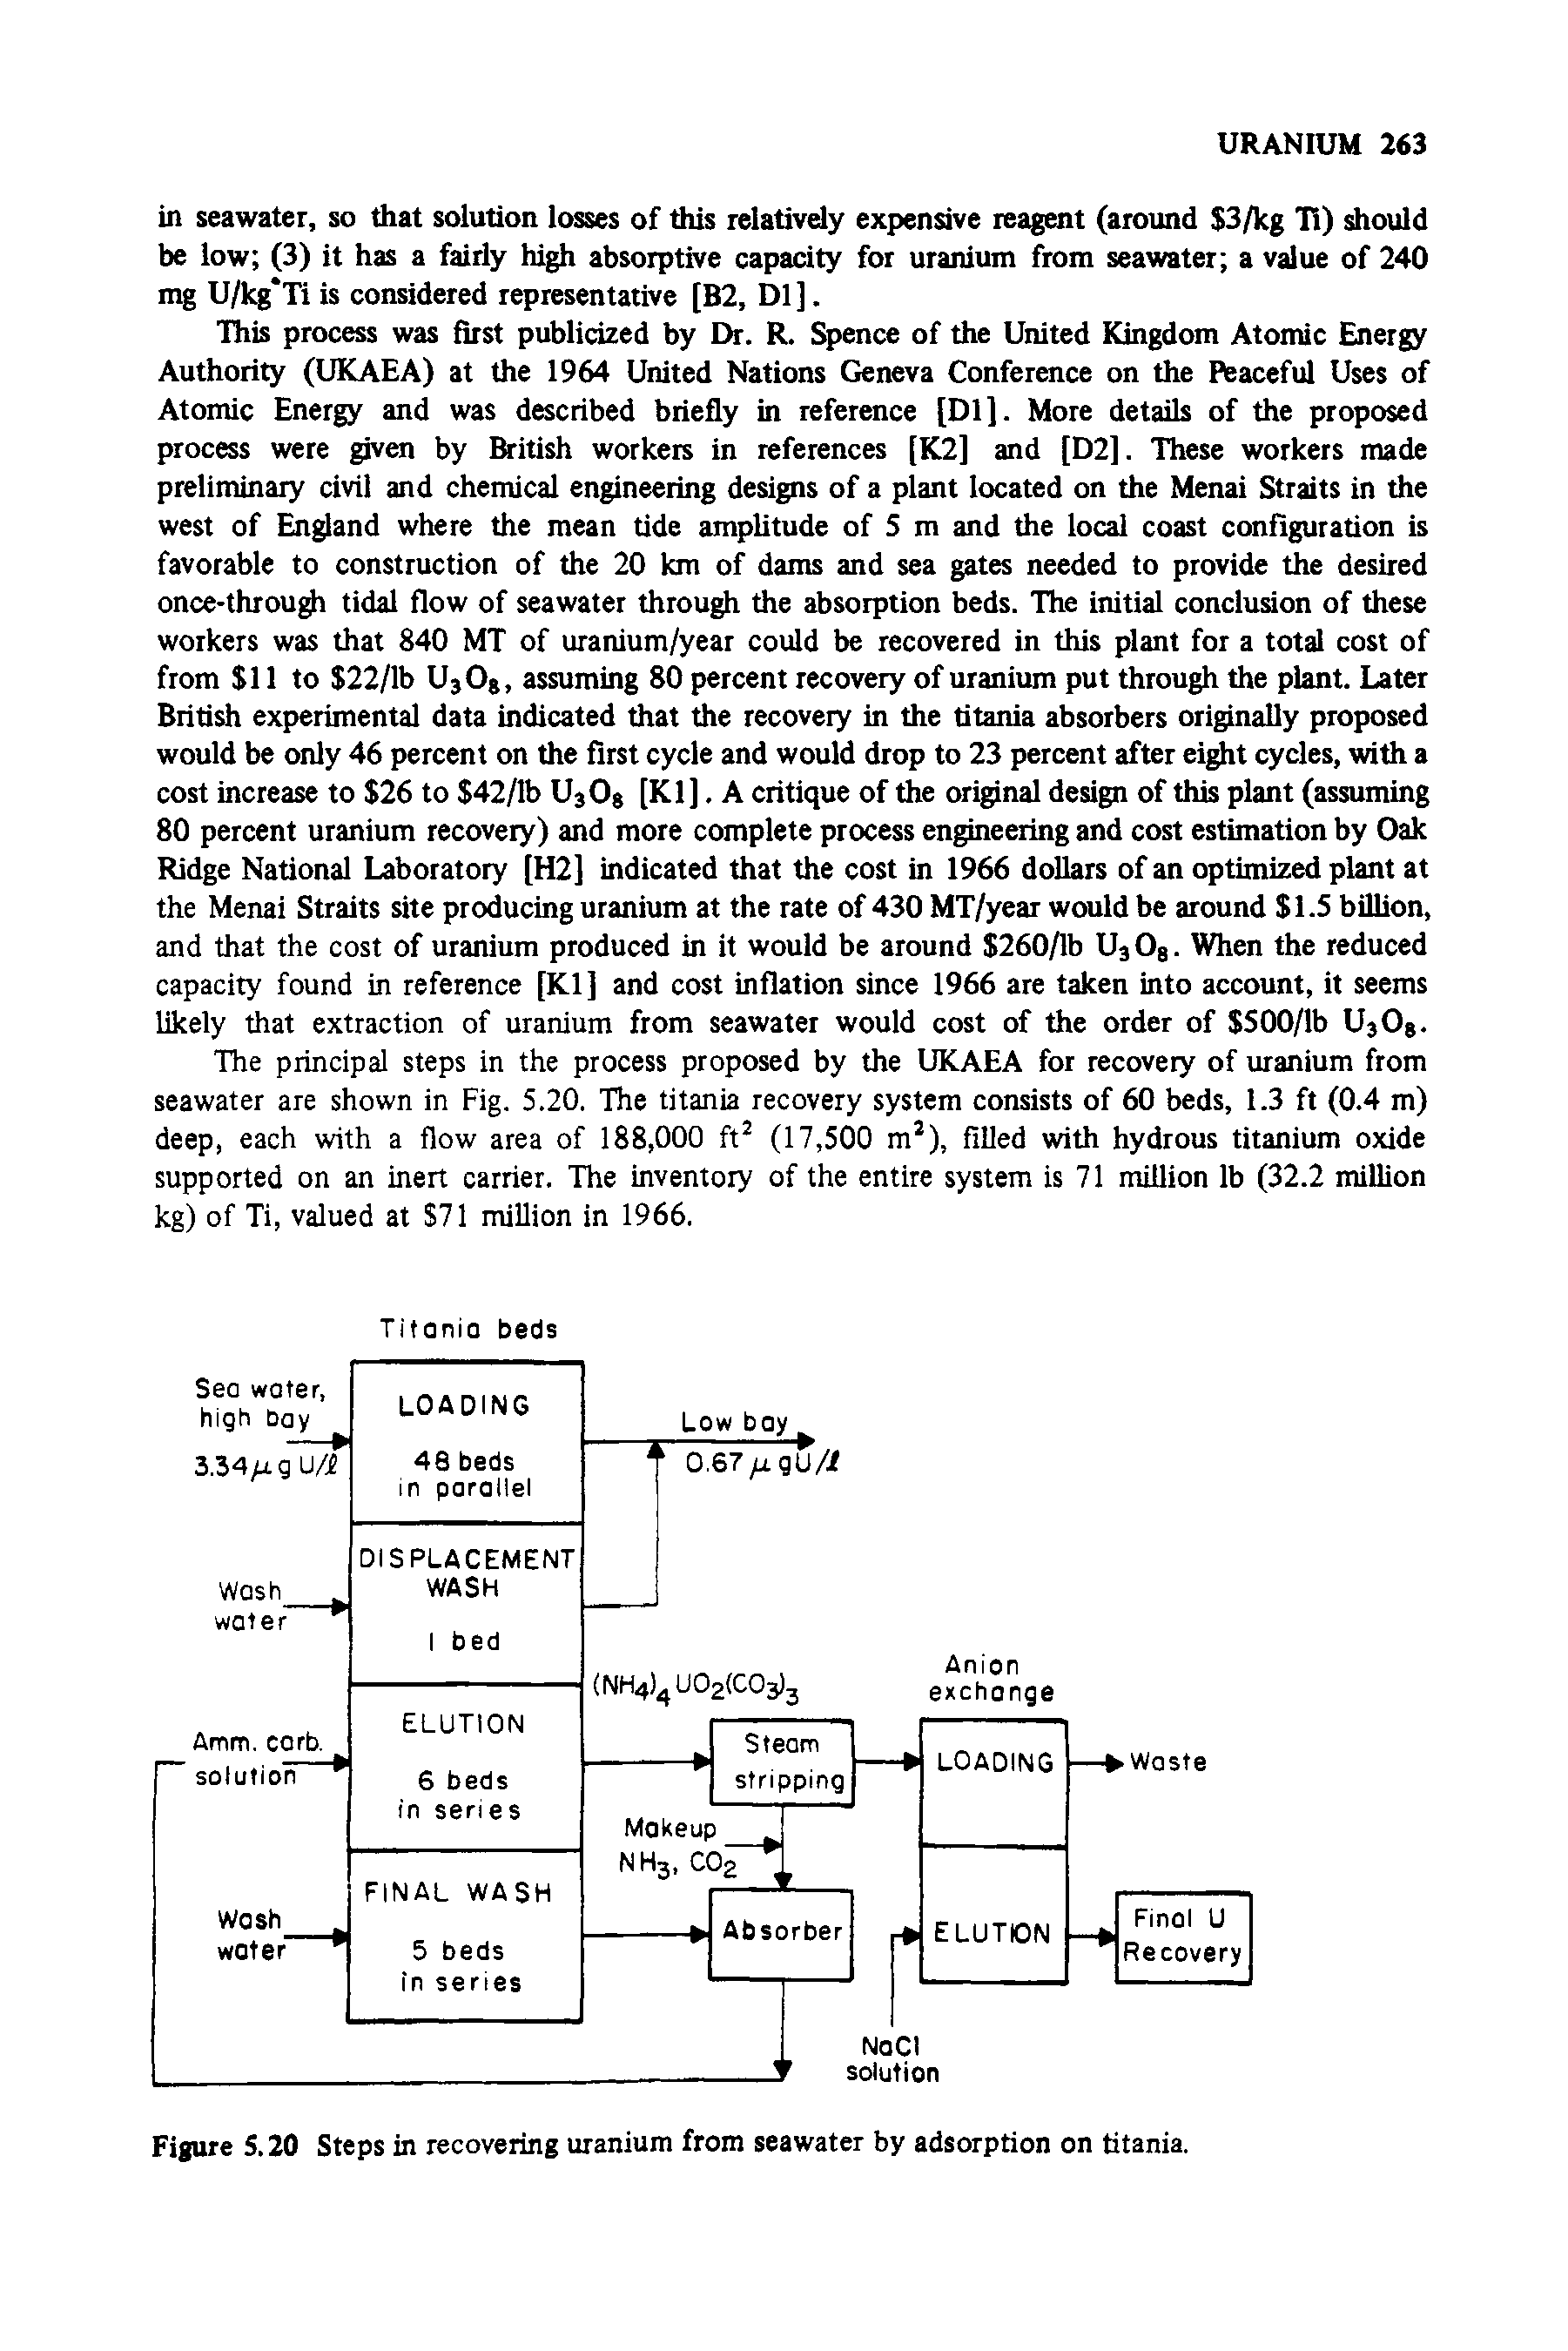 Figure 5.20 Steps in recovering uranium from seawater by adsorption on titania.